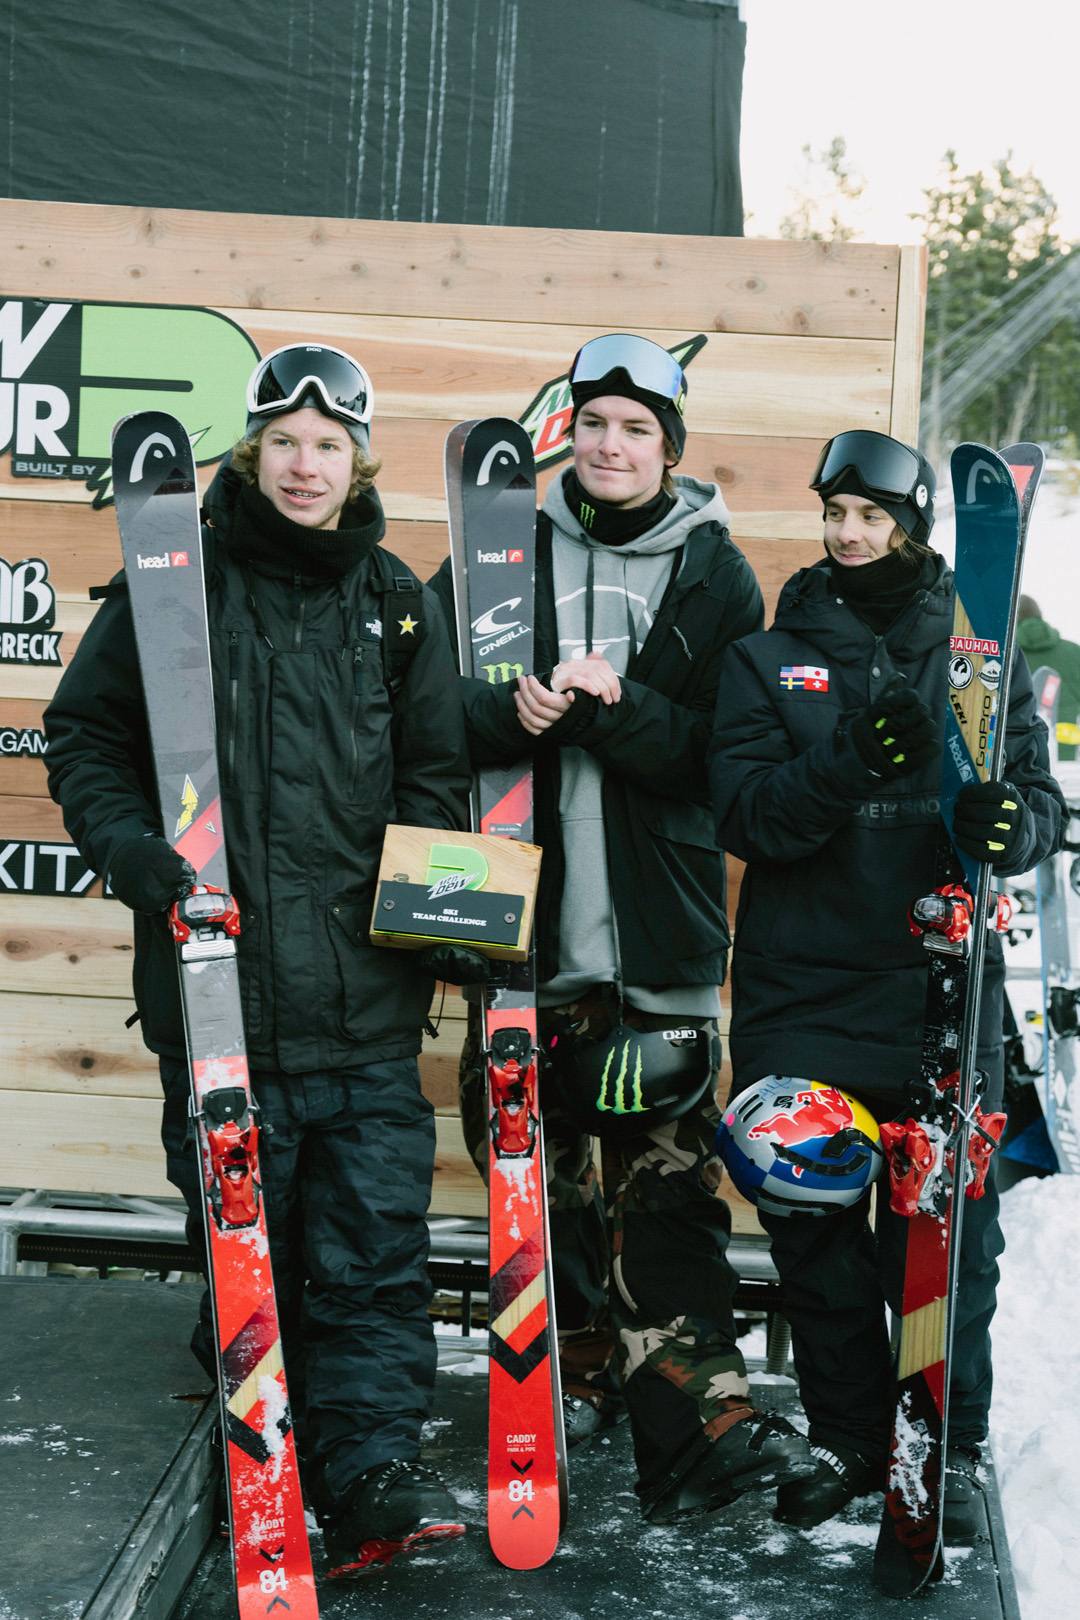 Monster Energy's Evan McEachran Takes Third Place with Team Head in the Team Challenge at Dew Tour Breckenridge